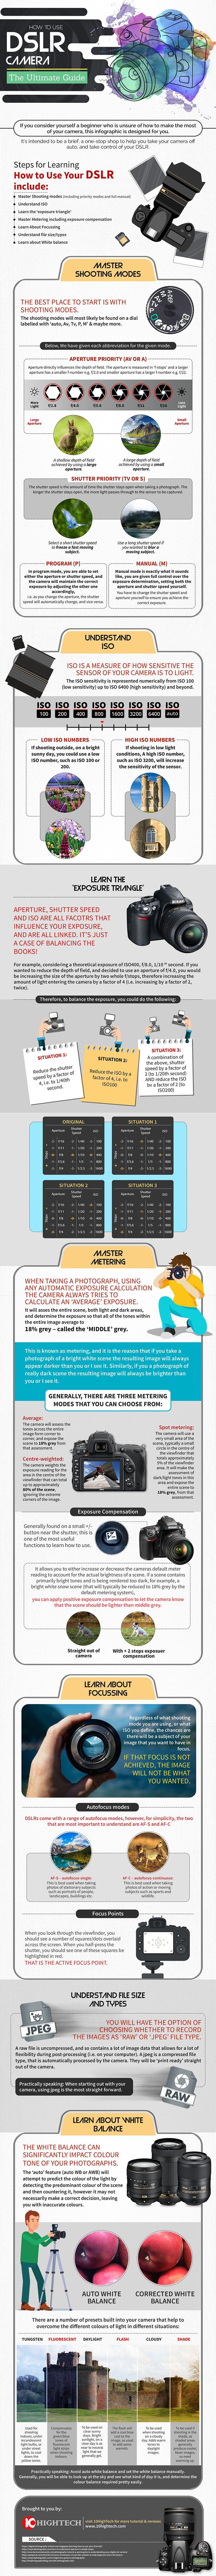 How to Take Stunning Photo with DSLR Camera – Beginners Guide: #infographic